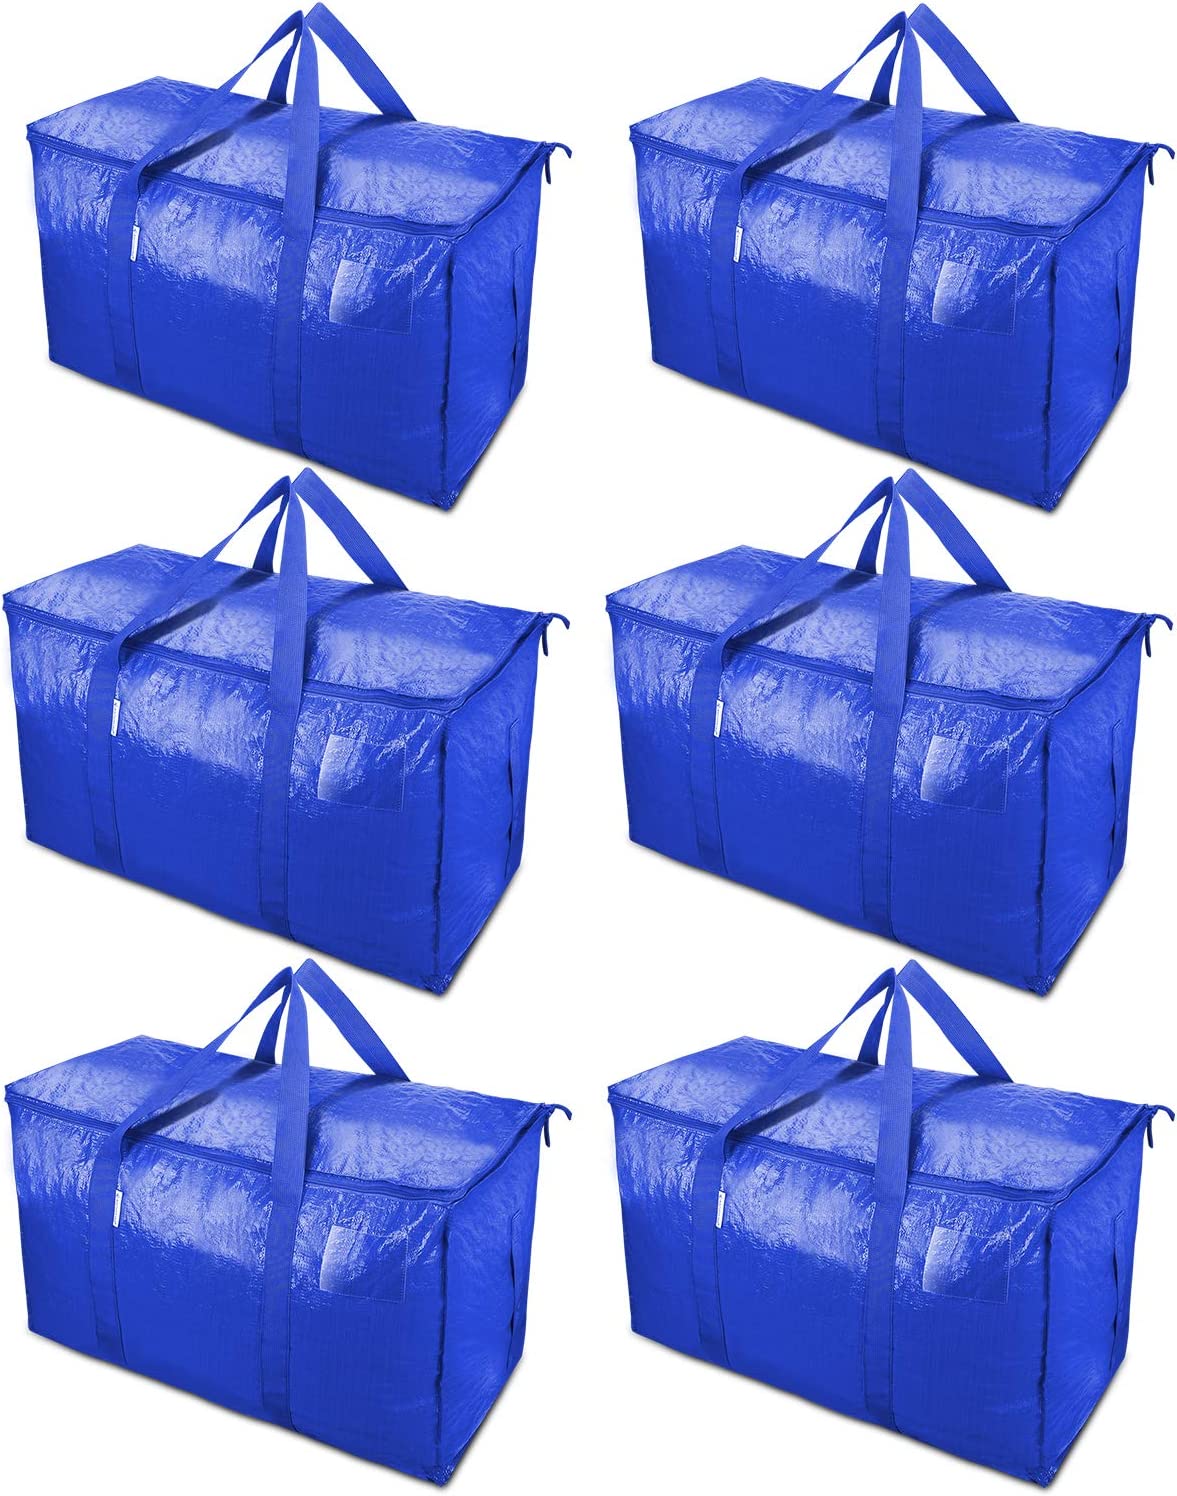 Lowest Price: TICONN 6 Pack Extra Large Moving Bags with